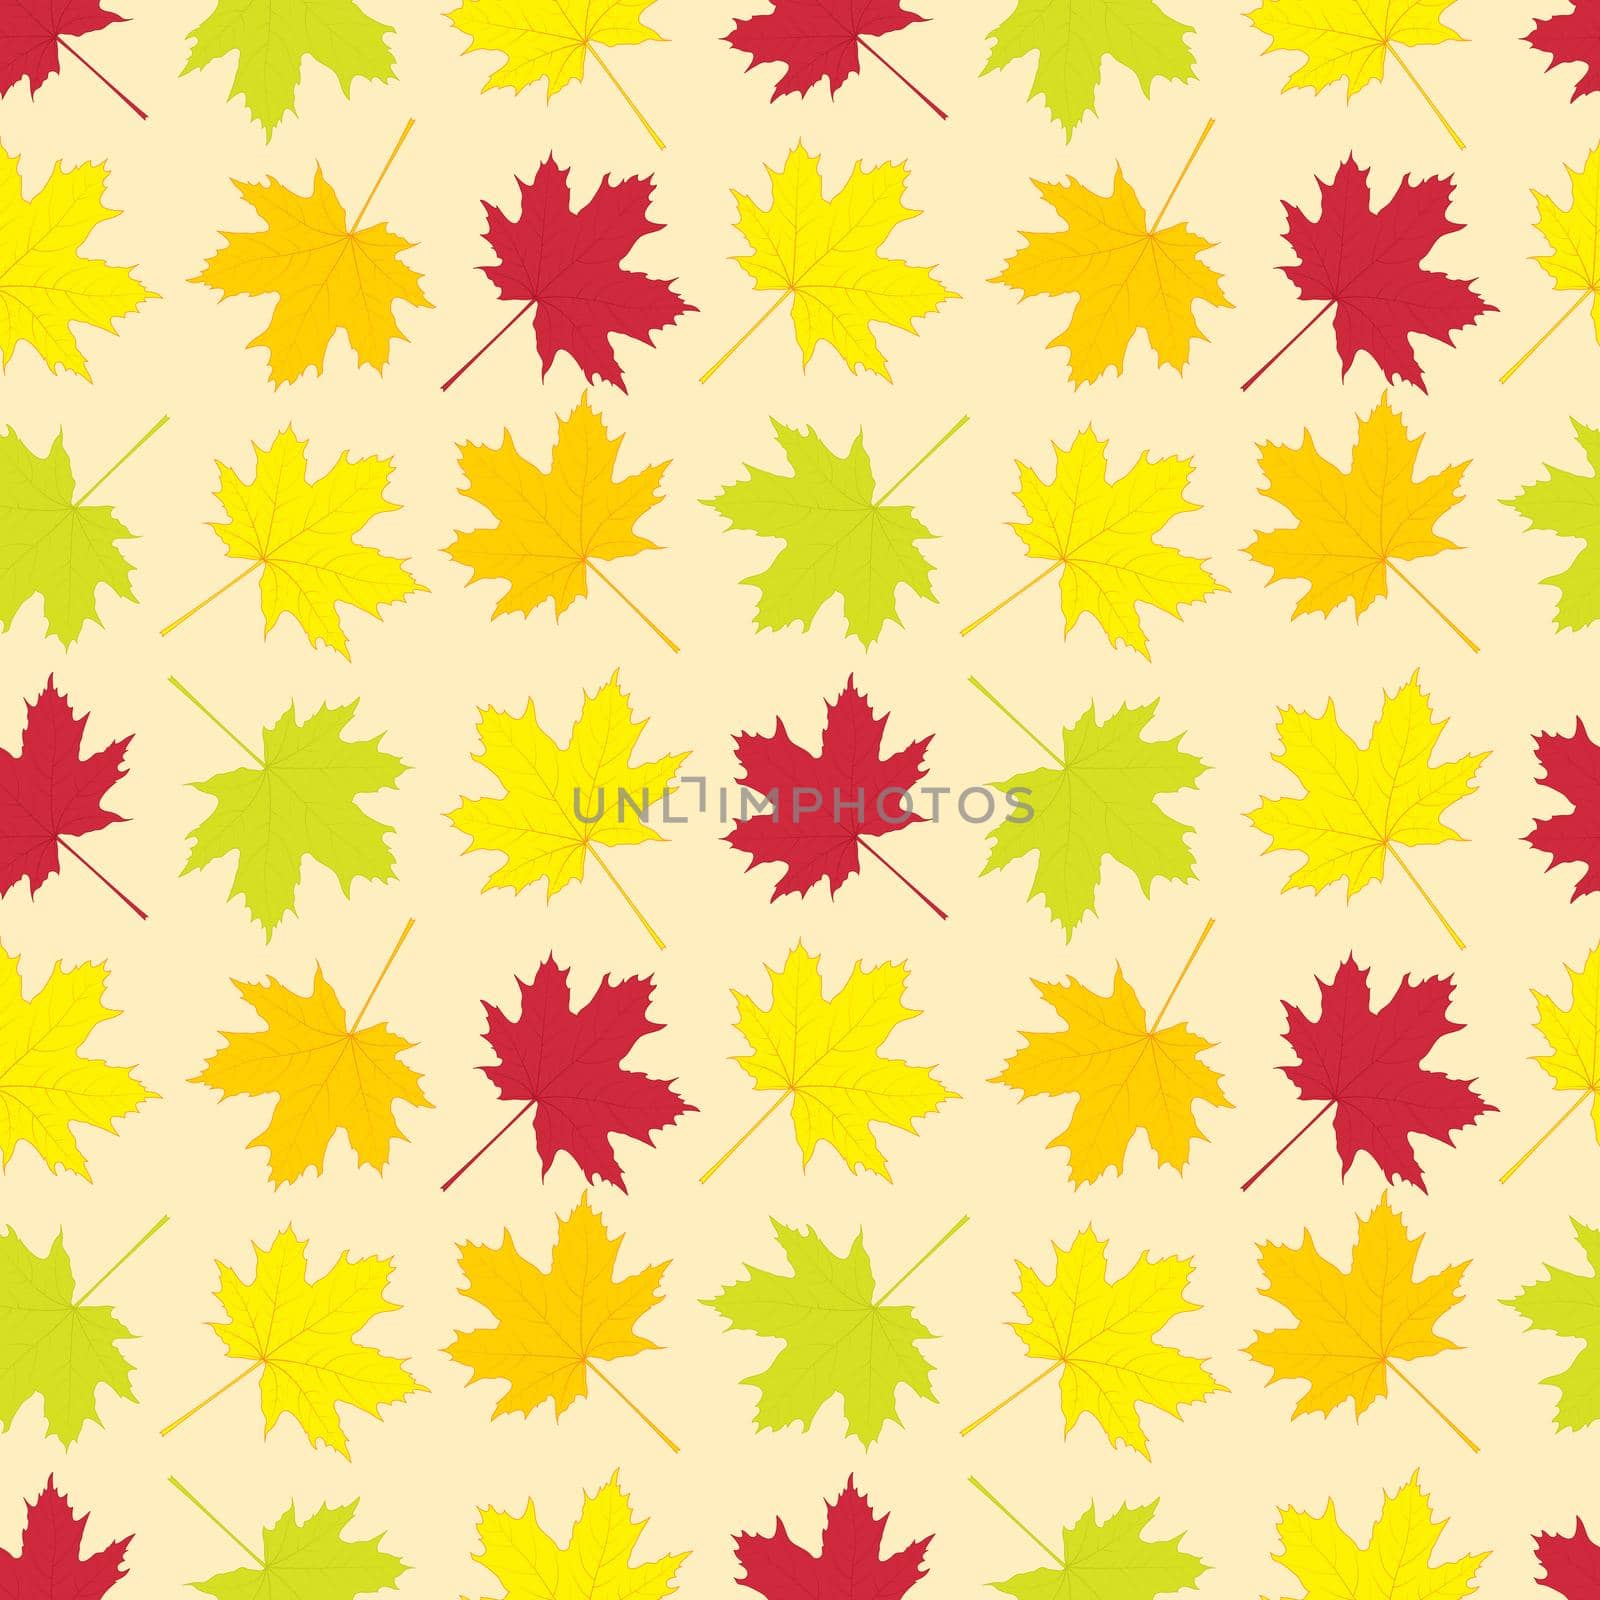 Seamless pattern of colorful autumn maple leaves for wrapping paper, wallpaper, pattern fills, web page background and more. illustration. by Marin4ik